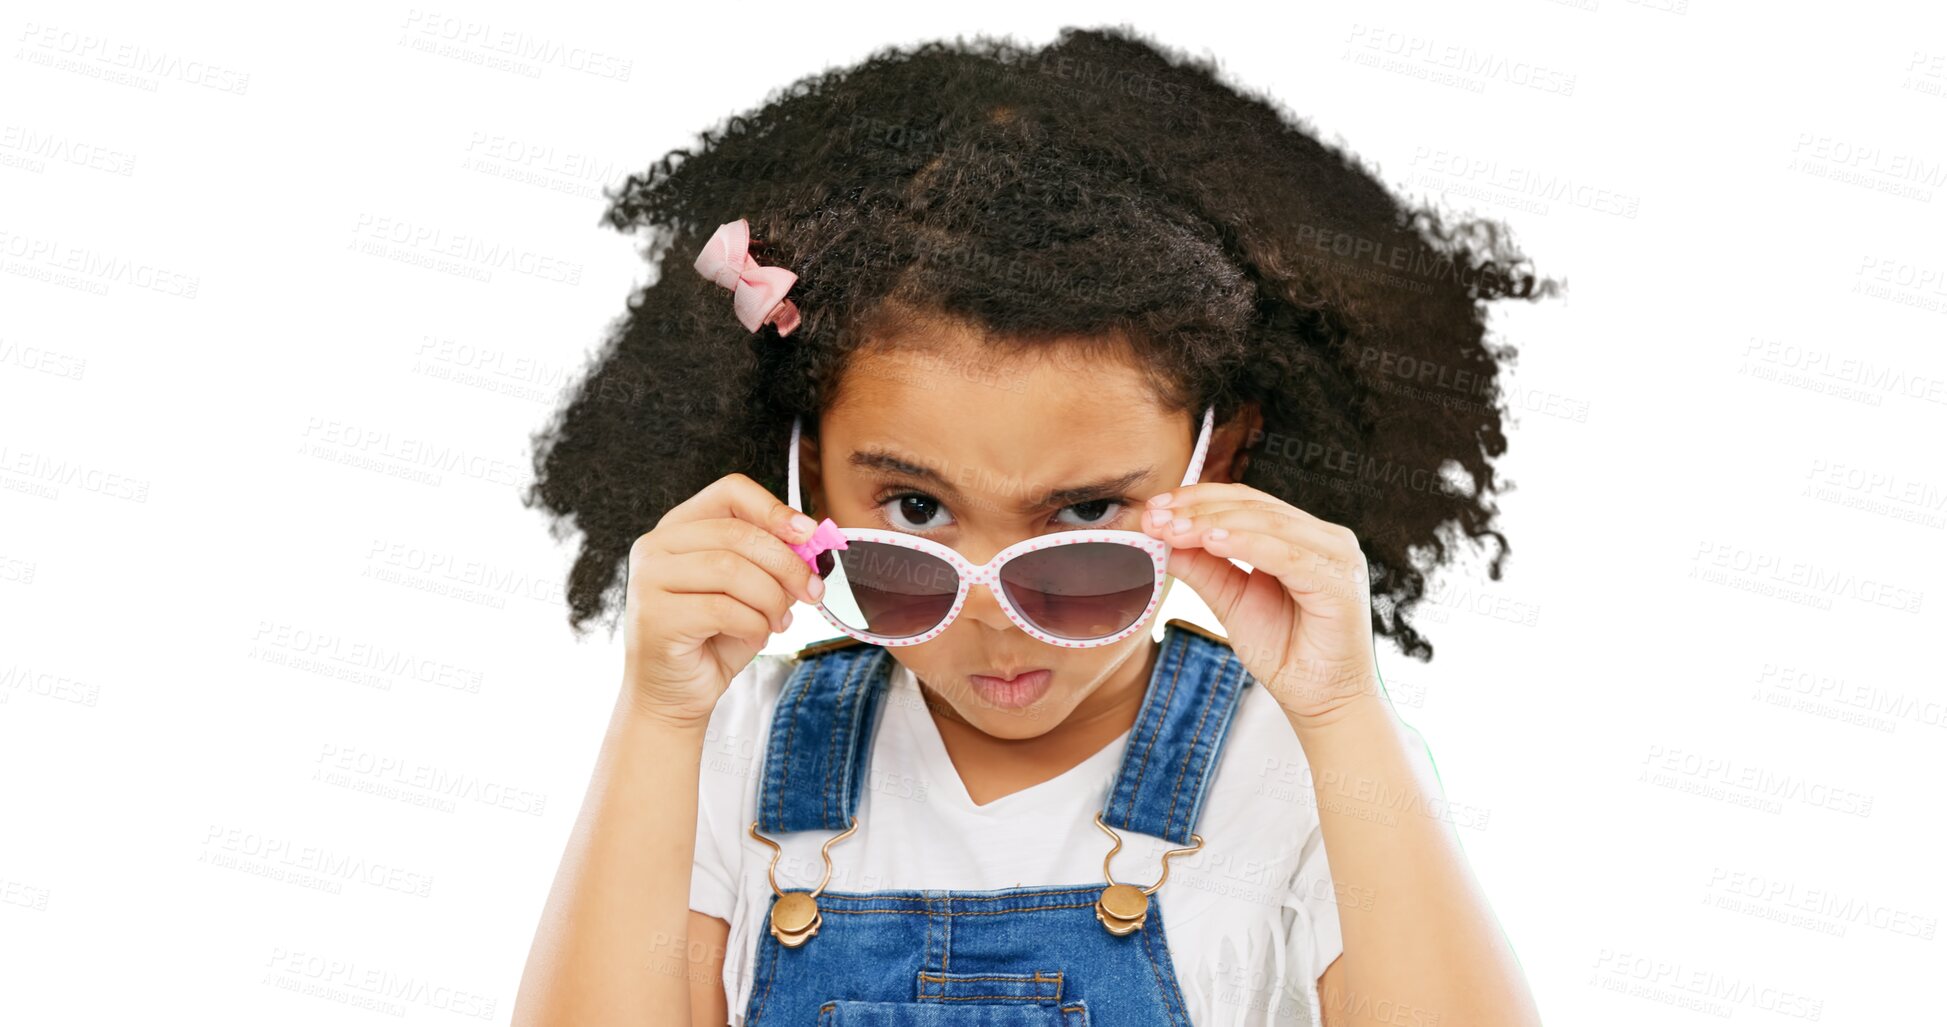 Buy stock photo Sunglasses, fashion and portrait of girl looking on isolated, png and transparent background. Emoji, youth and face of cute child with trendy clothes, style and accessories for funny, comic and humor